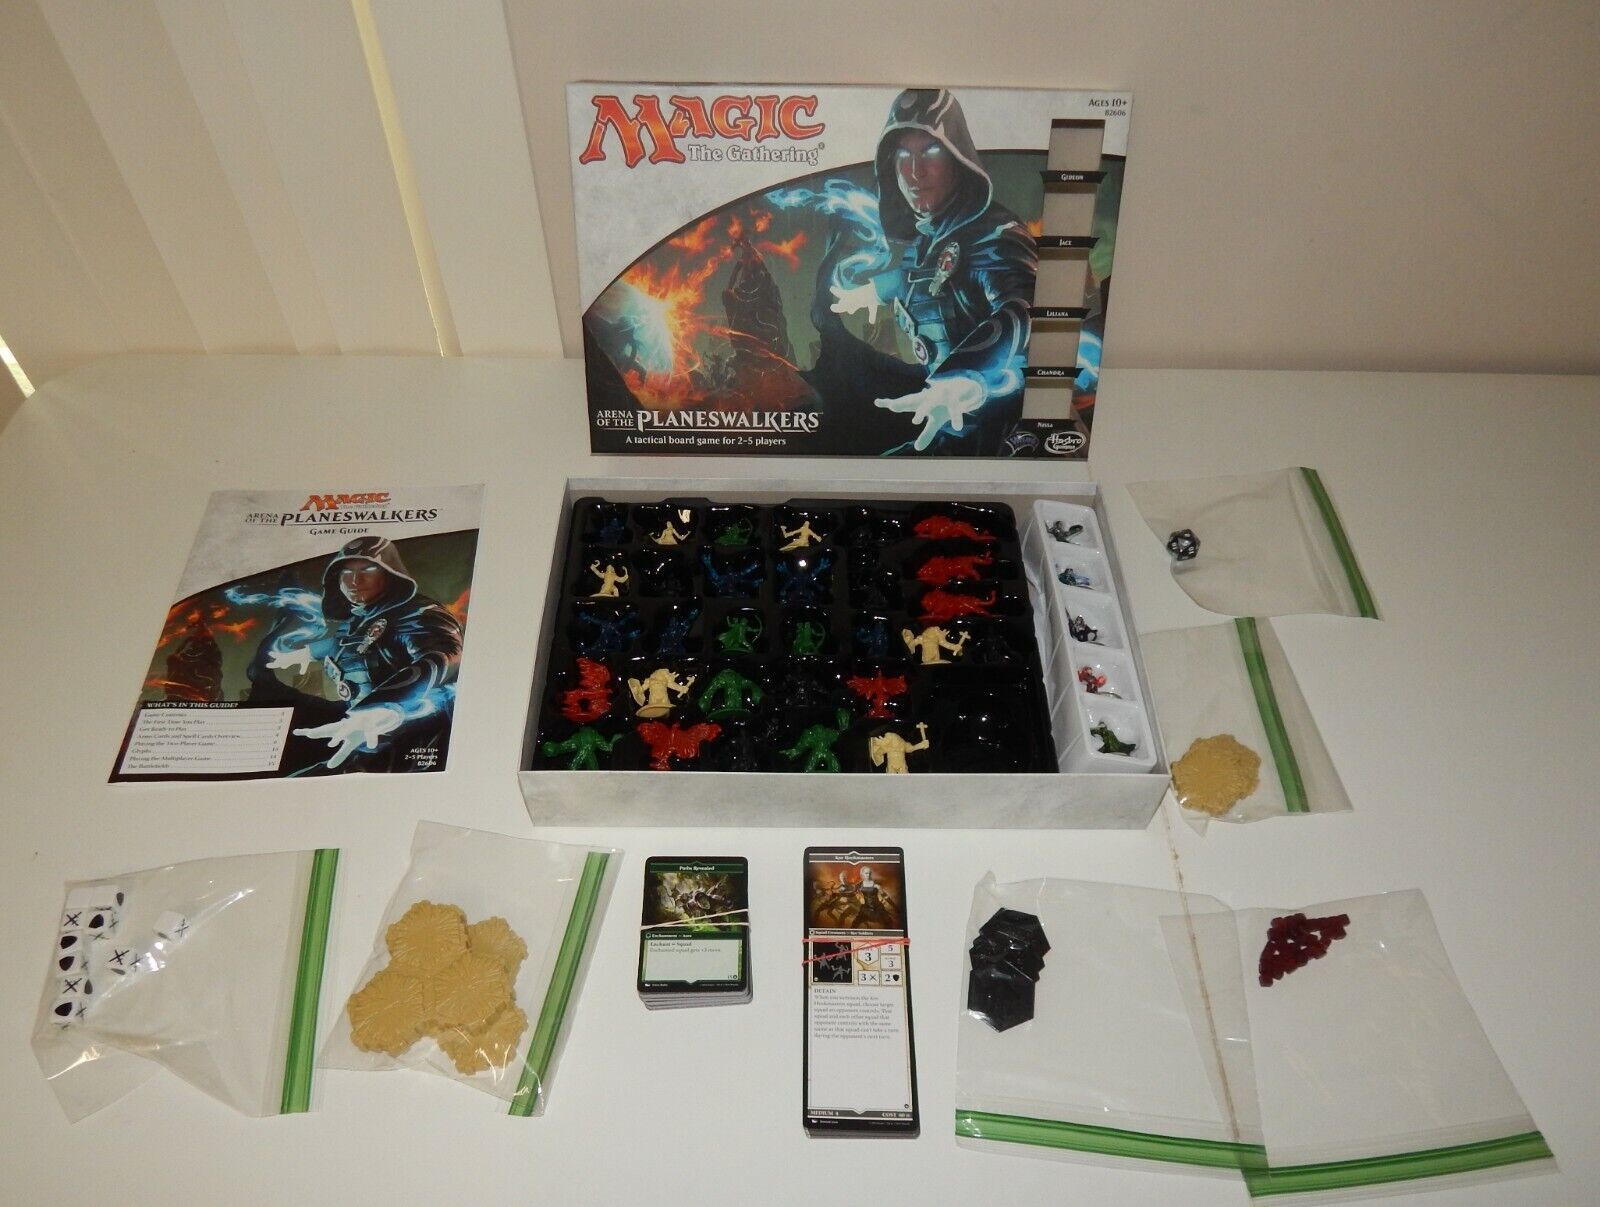 MTG Arena of the Planeswalkers B2606 Hasbro 2014 Pieces & Parts - $10.57 - $21.11